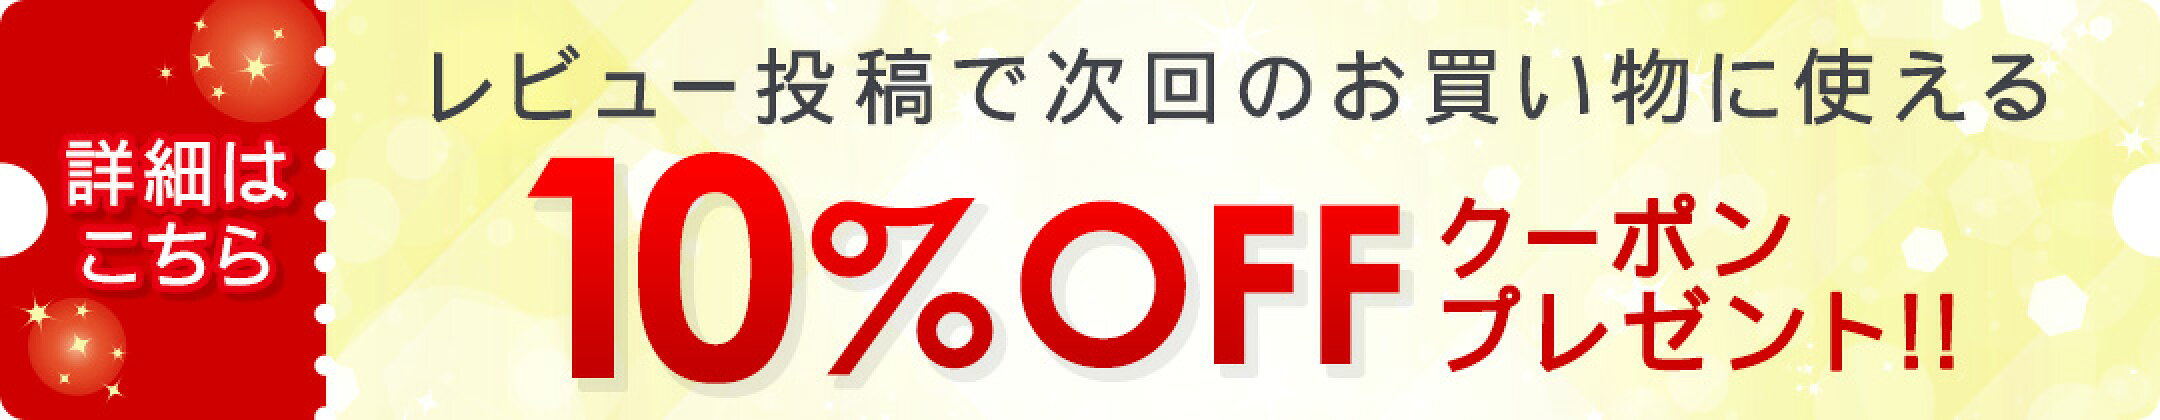 10%OFFクーポンプレゼント！